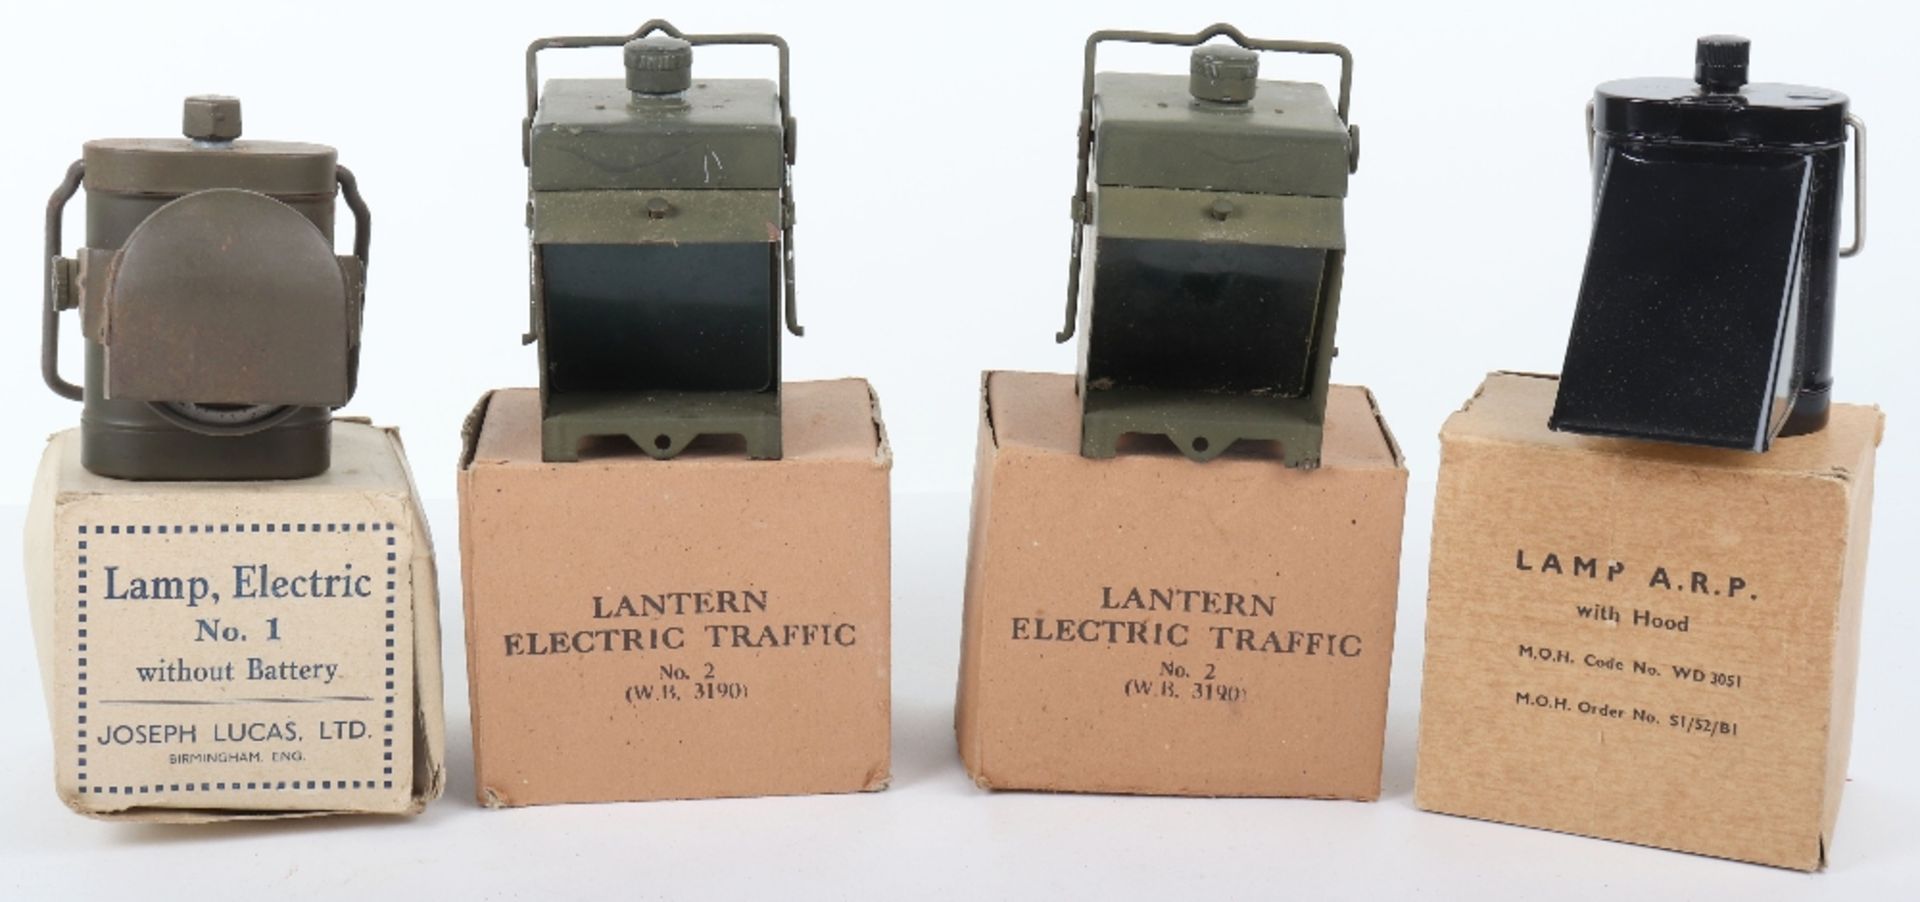 WW2 Lamps in Boxes